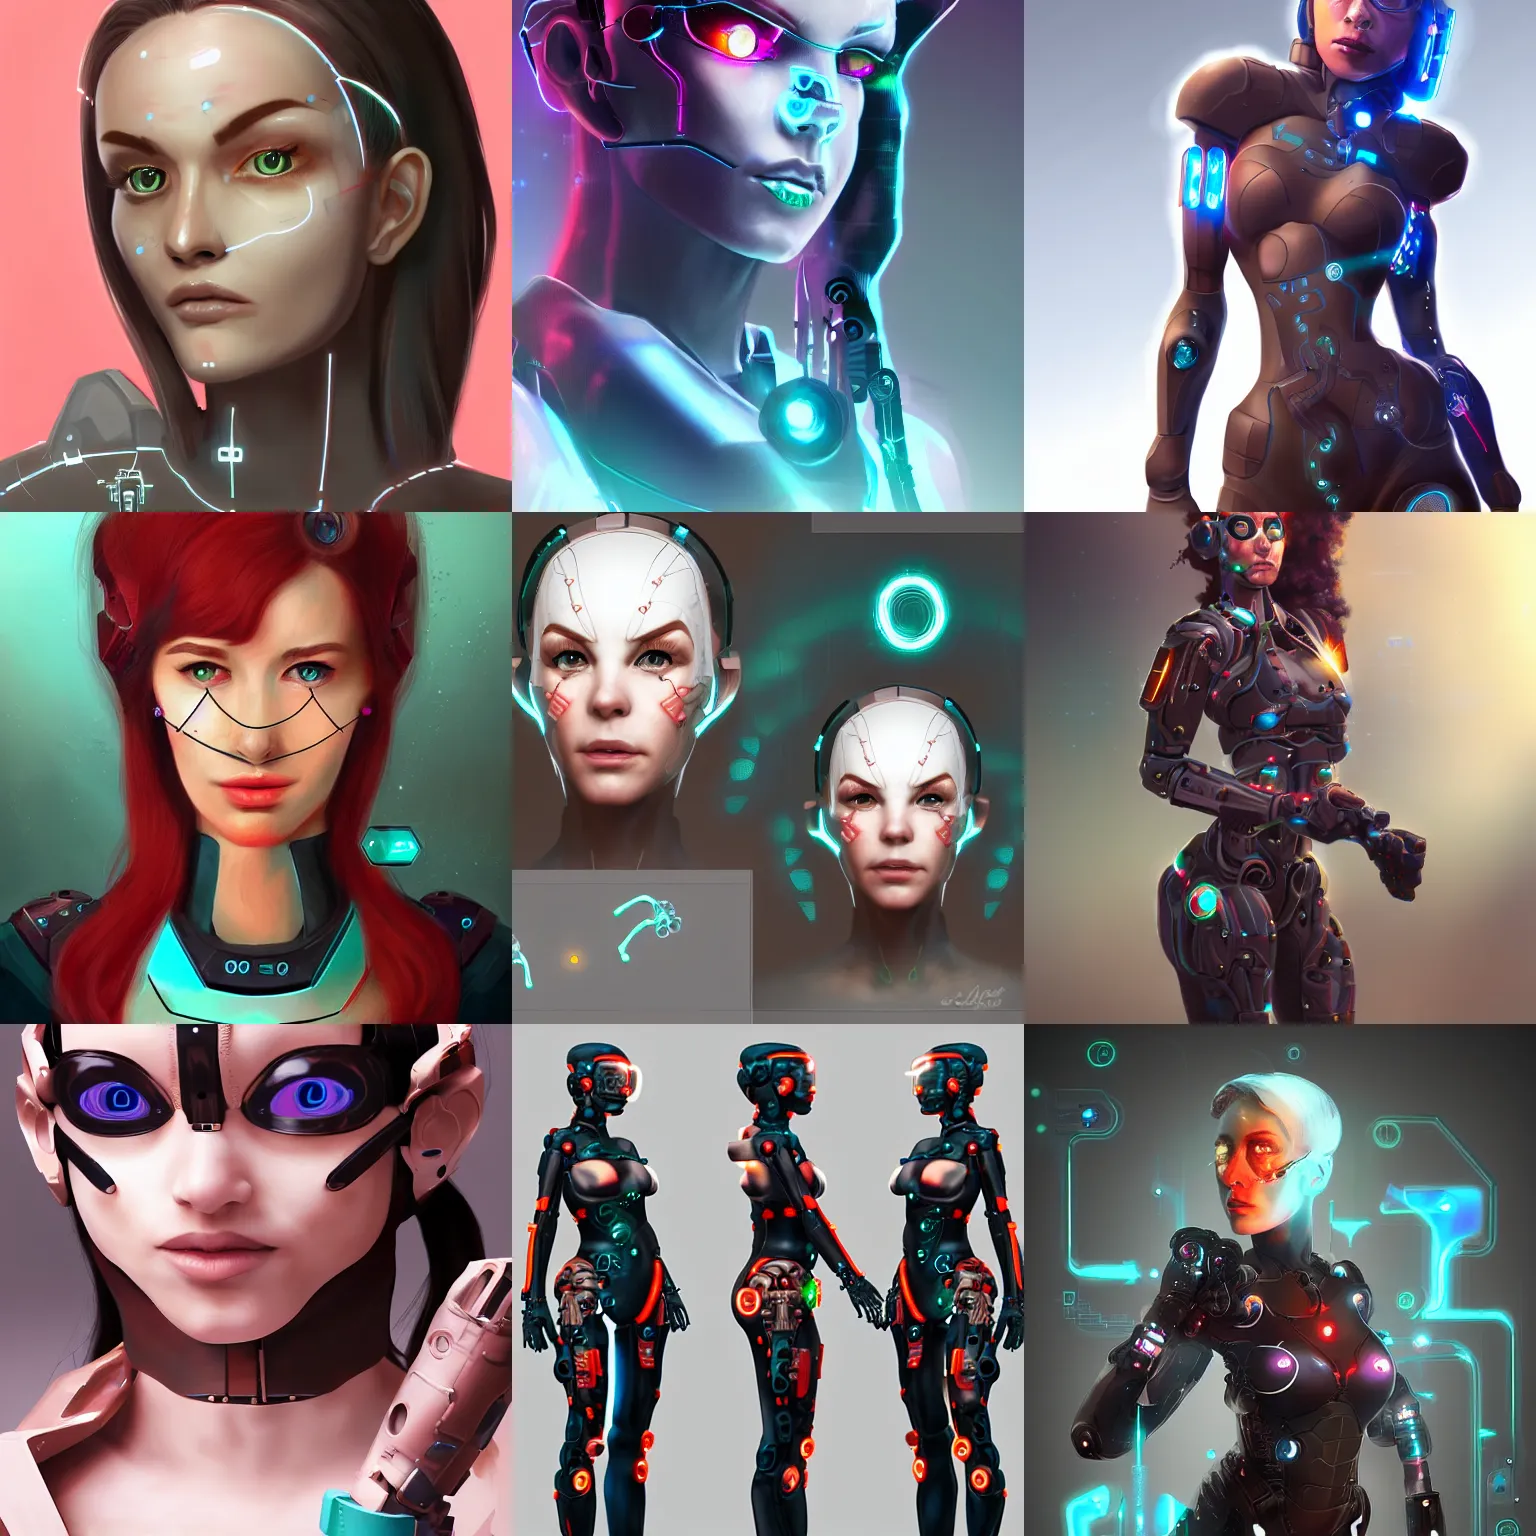 Prompt: i made the cyborg lady i want to be when humanity grows up and i can bioengineer augmented interfaces. i'm gonna be cute af and badass. unreal engine & digital painting, trending on artstation